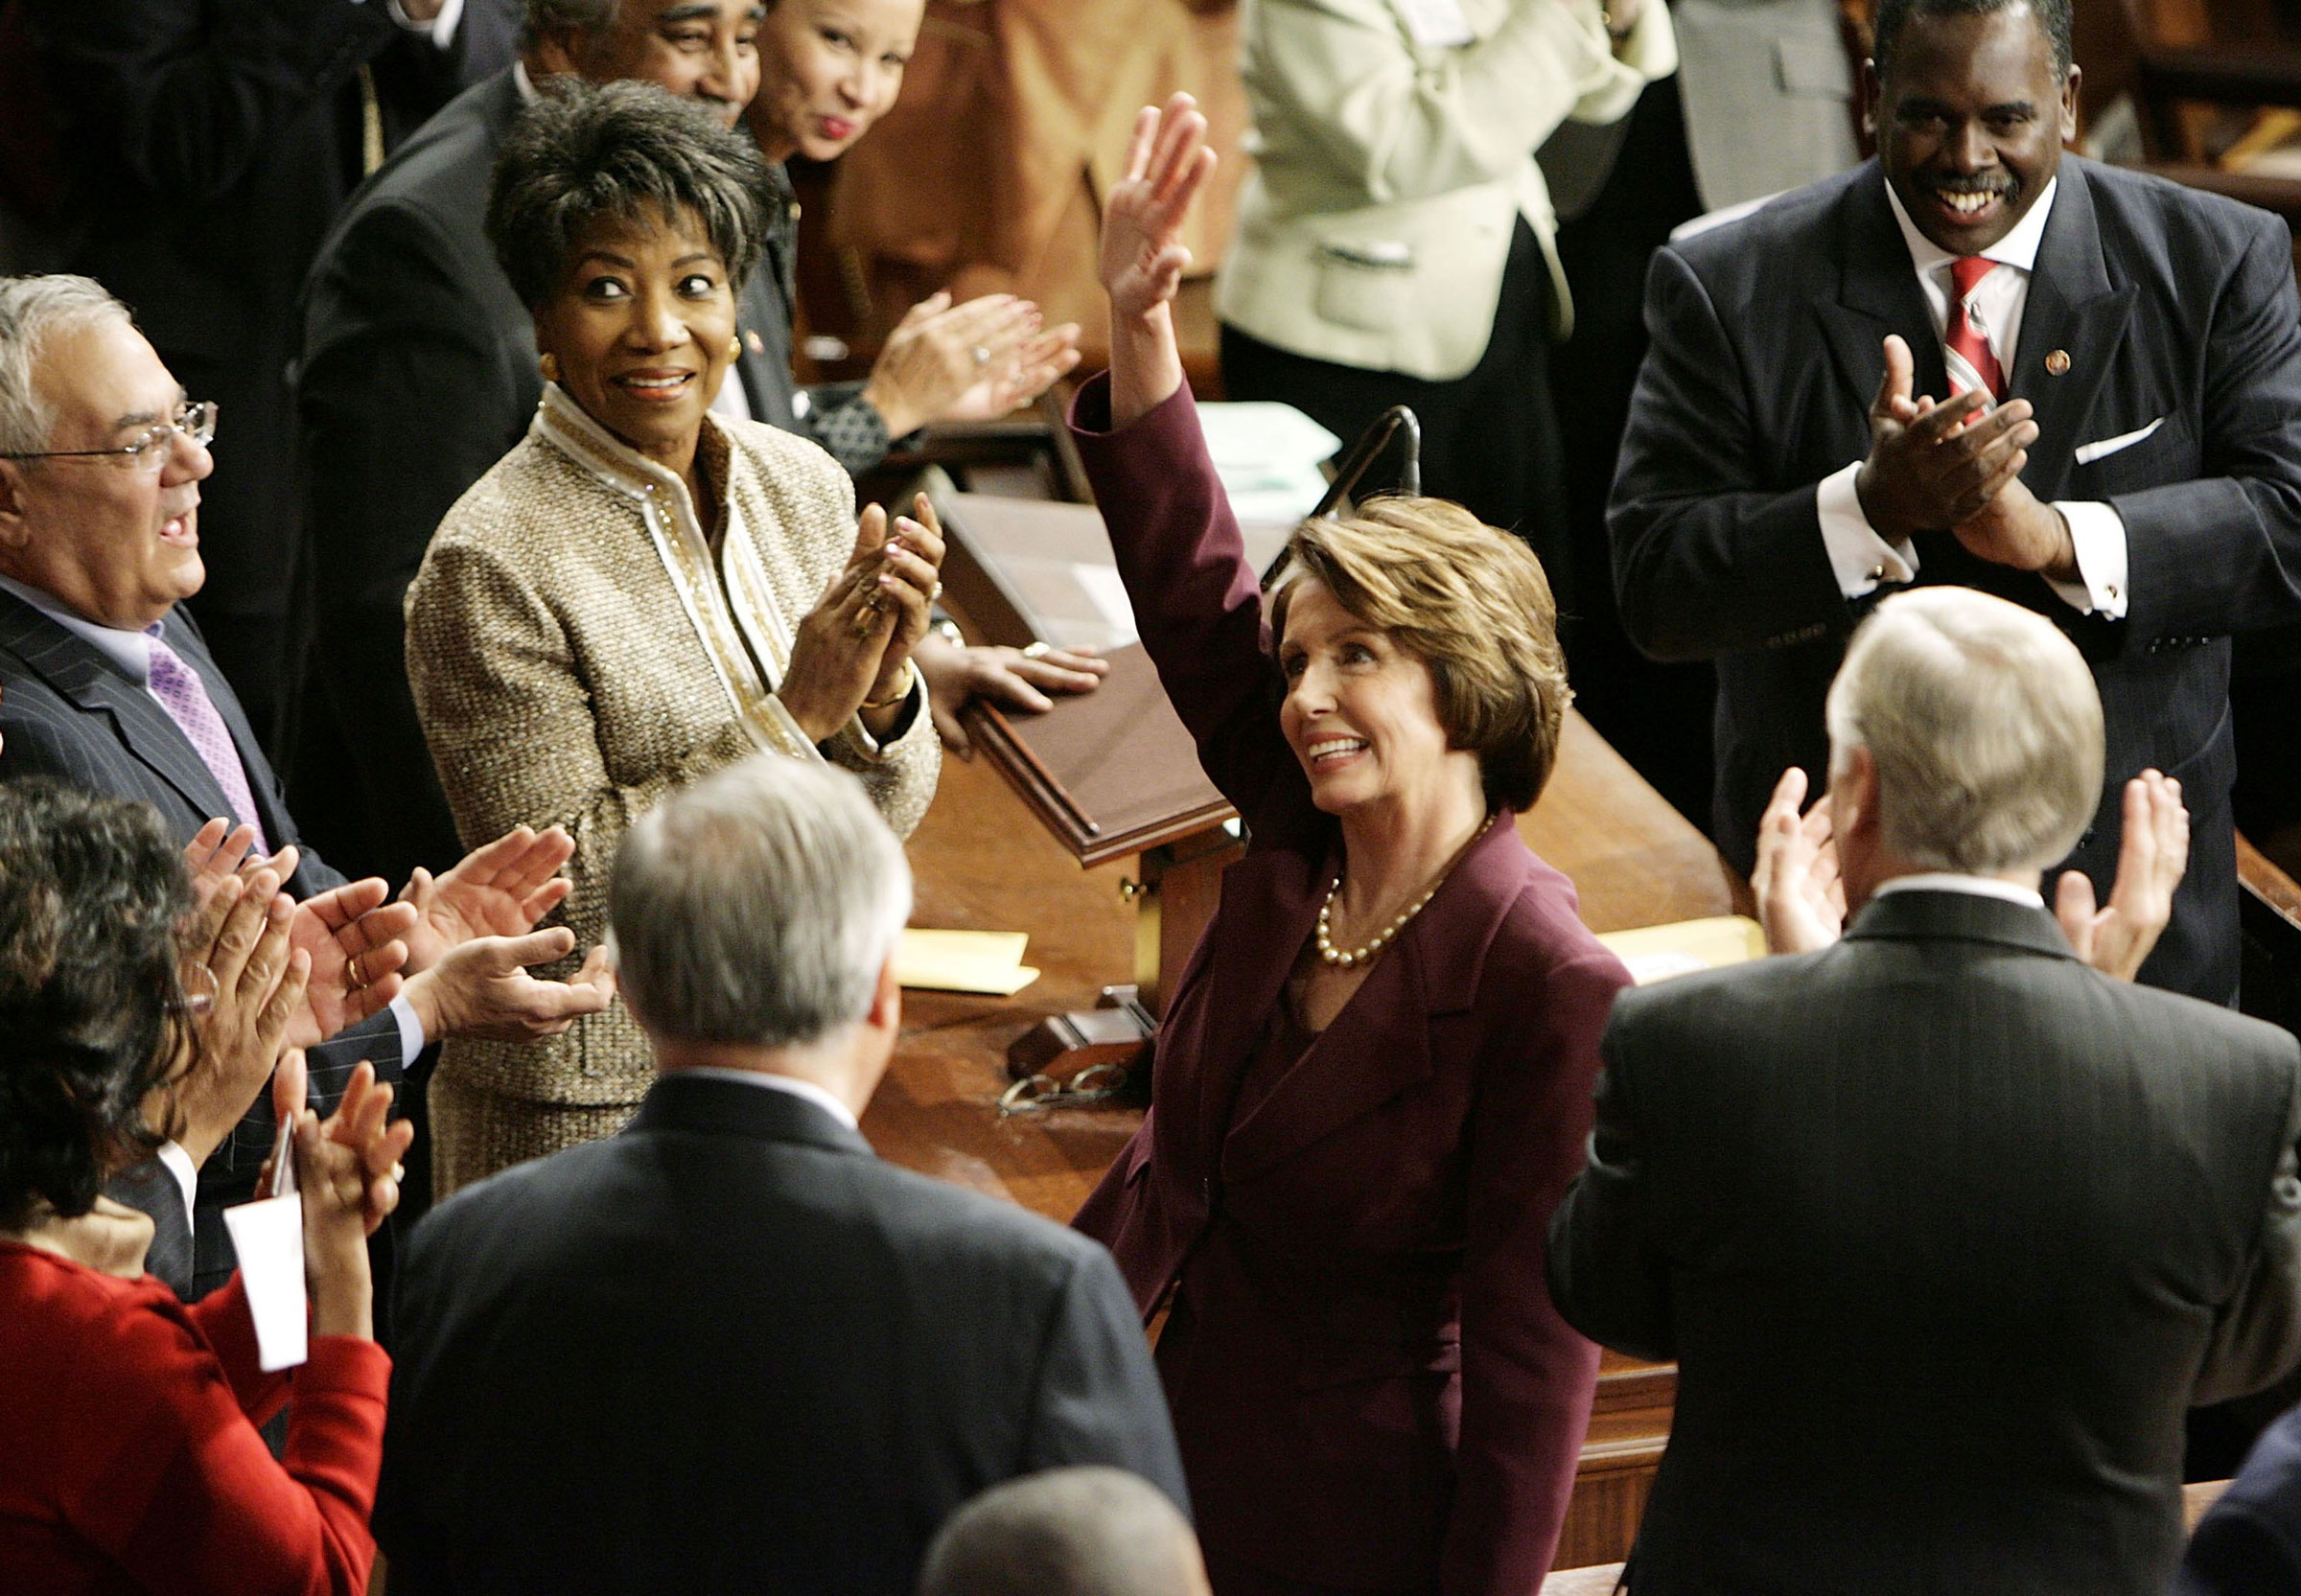 Nancy Pelosi waves to colleagues while being nominated as the next Speaker of the House during a swearing in ceremony for the 110th Congress in the House Chamber of the U.S. Capitol in Washington, DC., on Jan. 4, 2007. (Chip Somodevilla—Getty Images)